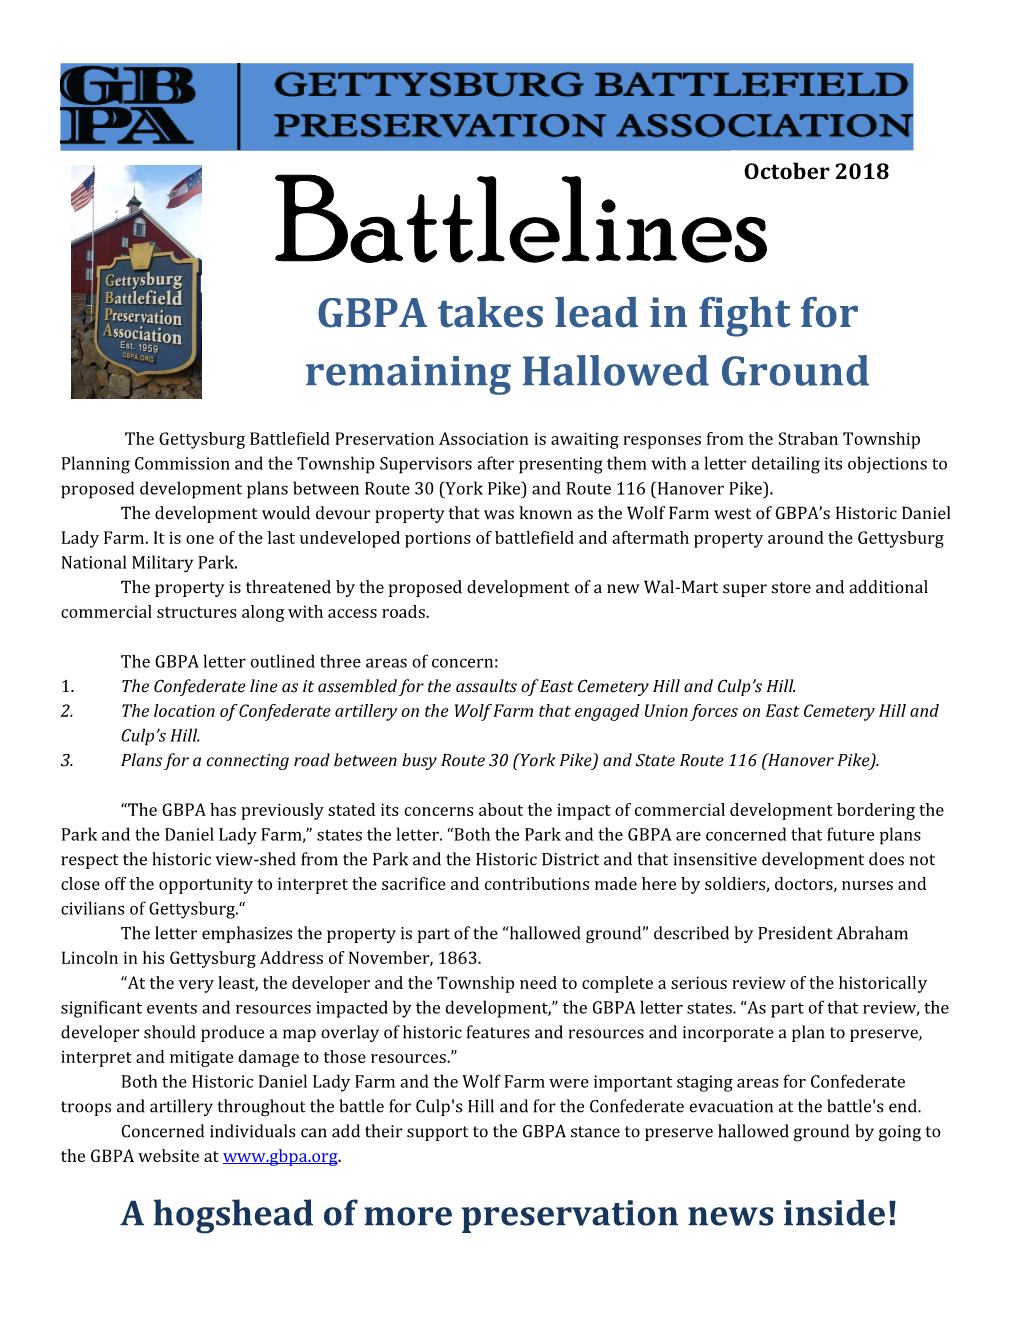 GBPA Takes Lead in Fight for Remaining Hallowed Ground